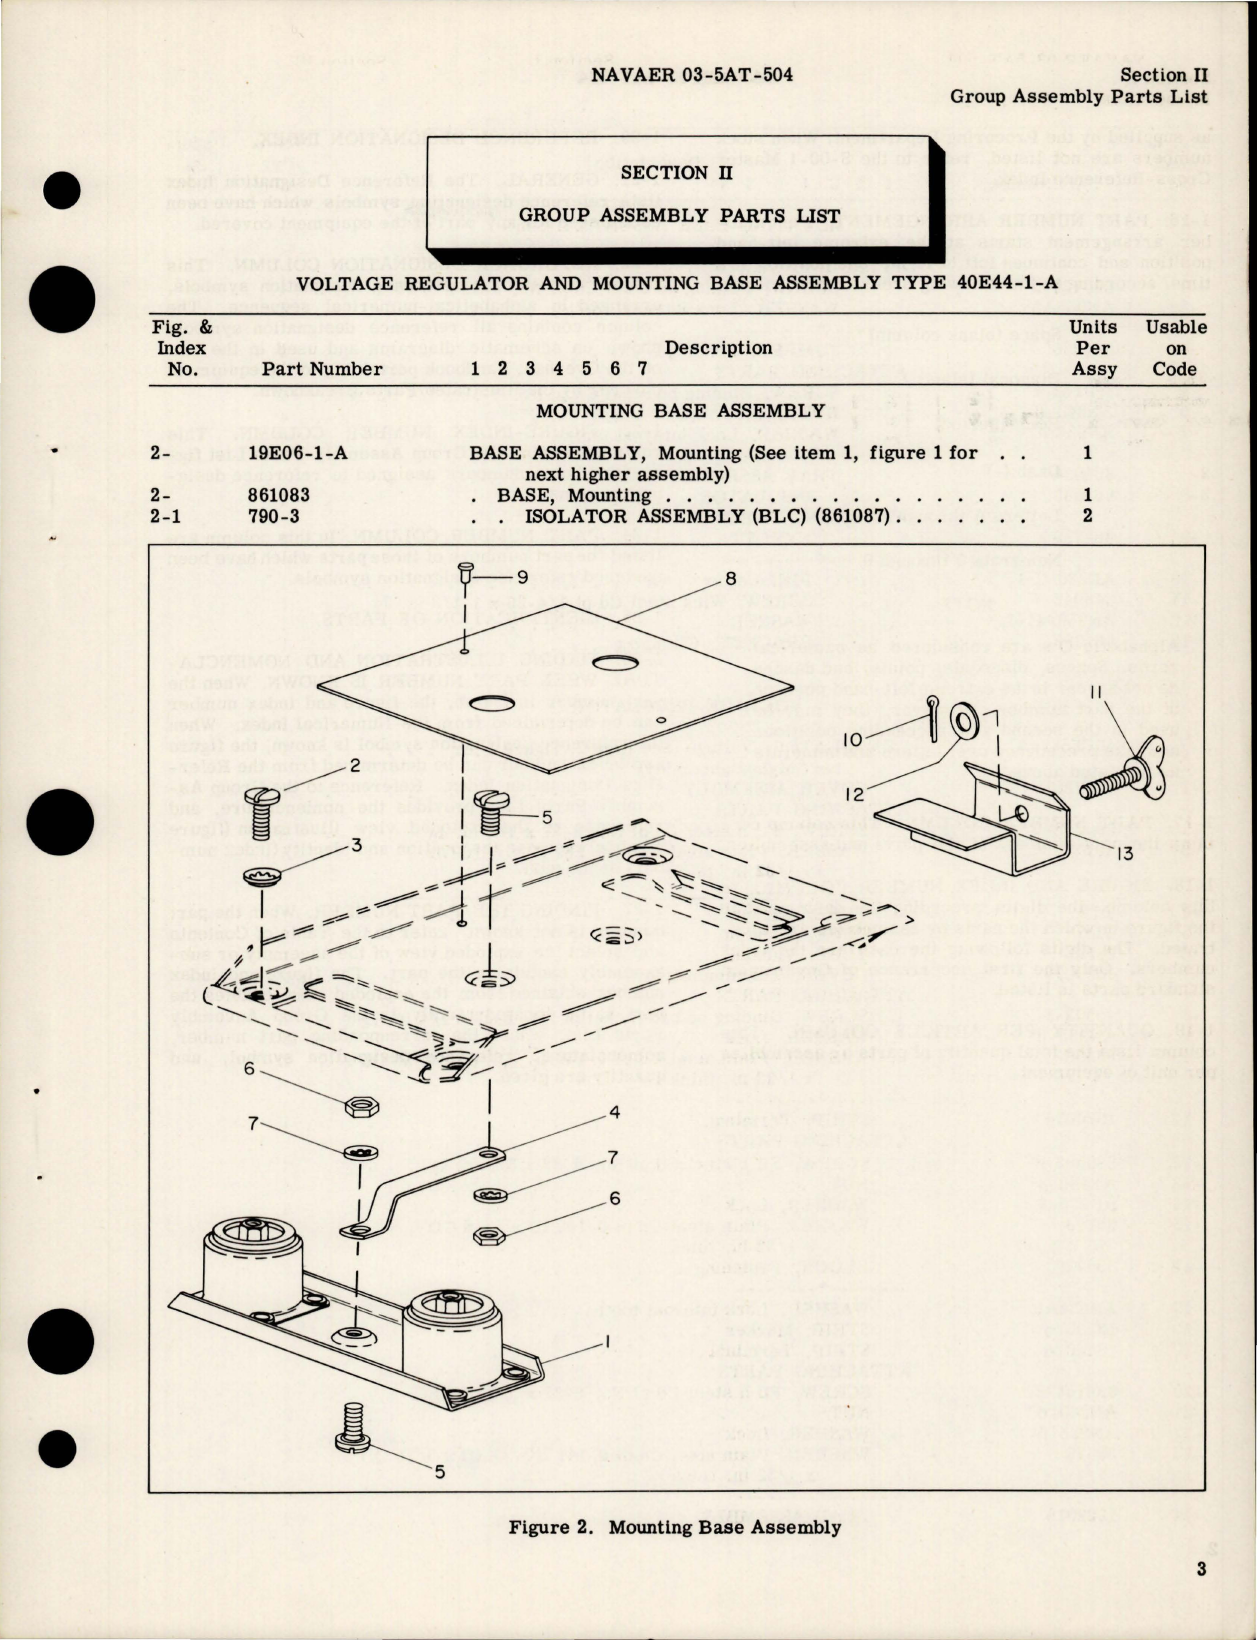 Sample page 7 from AirCorps Library document: Illustrated Parts Breakdown for Voltage Regulator and Mounting Base Assembly - Type - 40E44-1-A